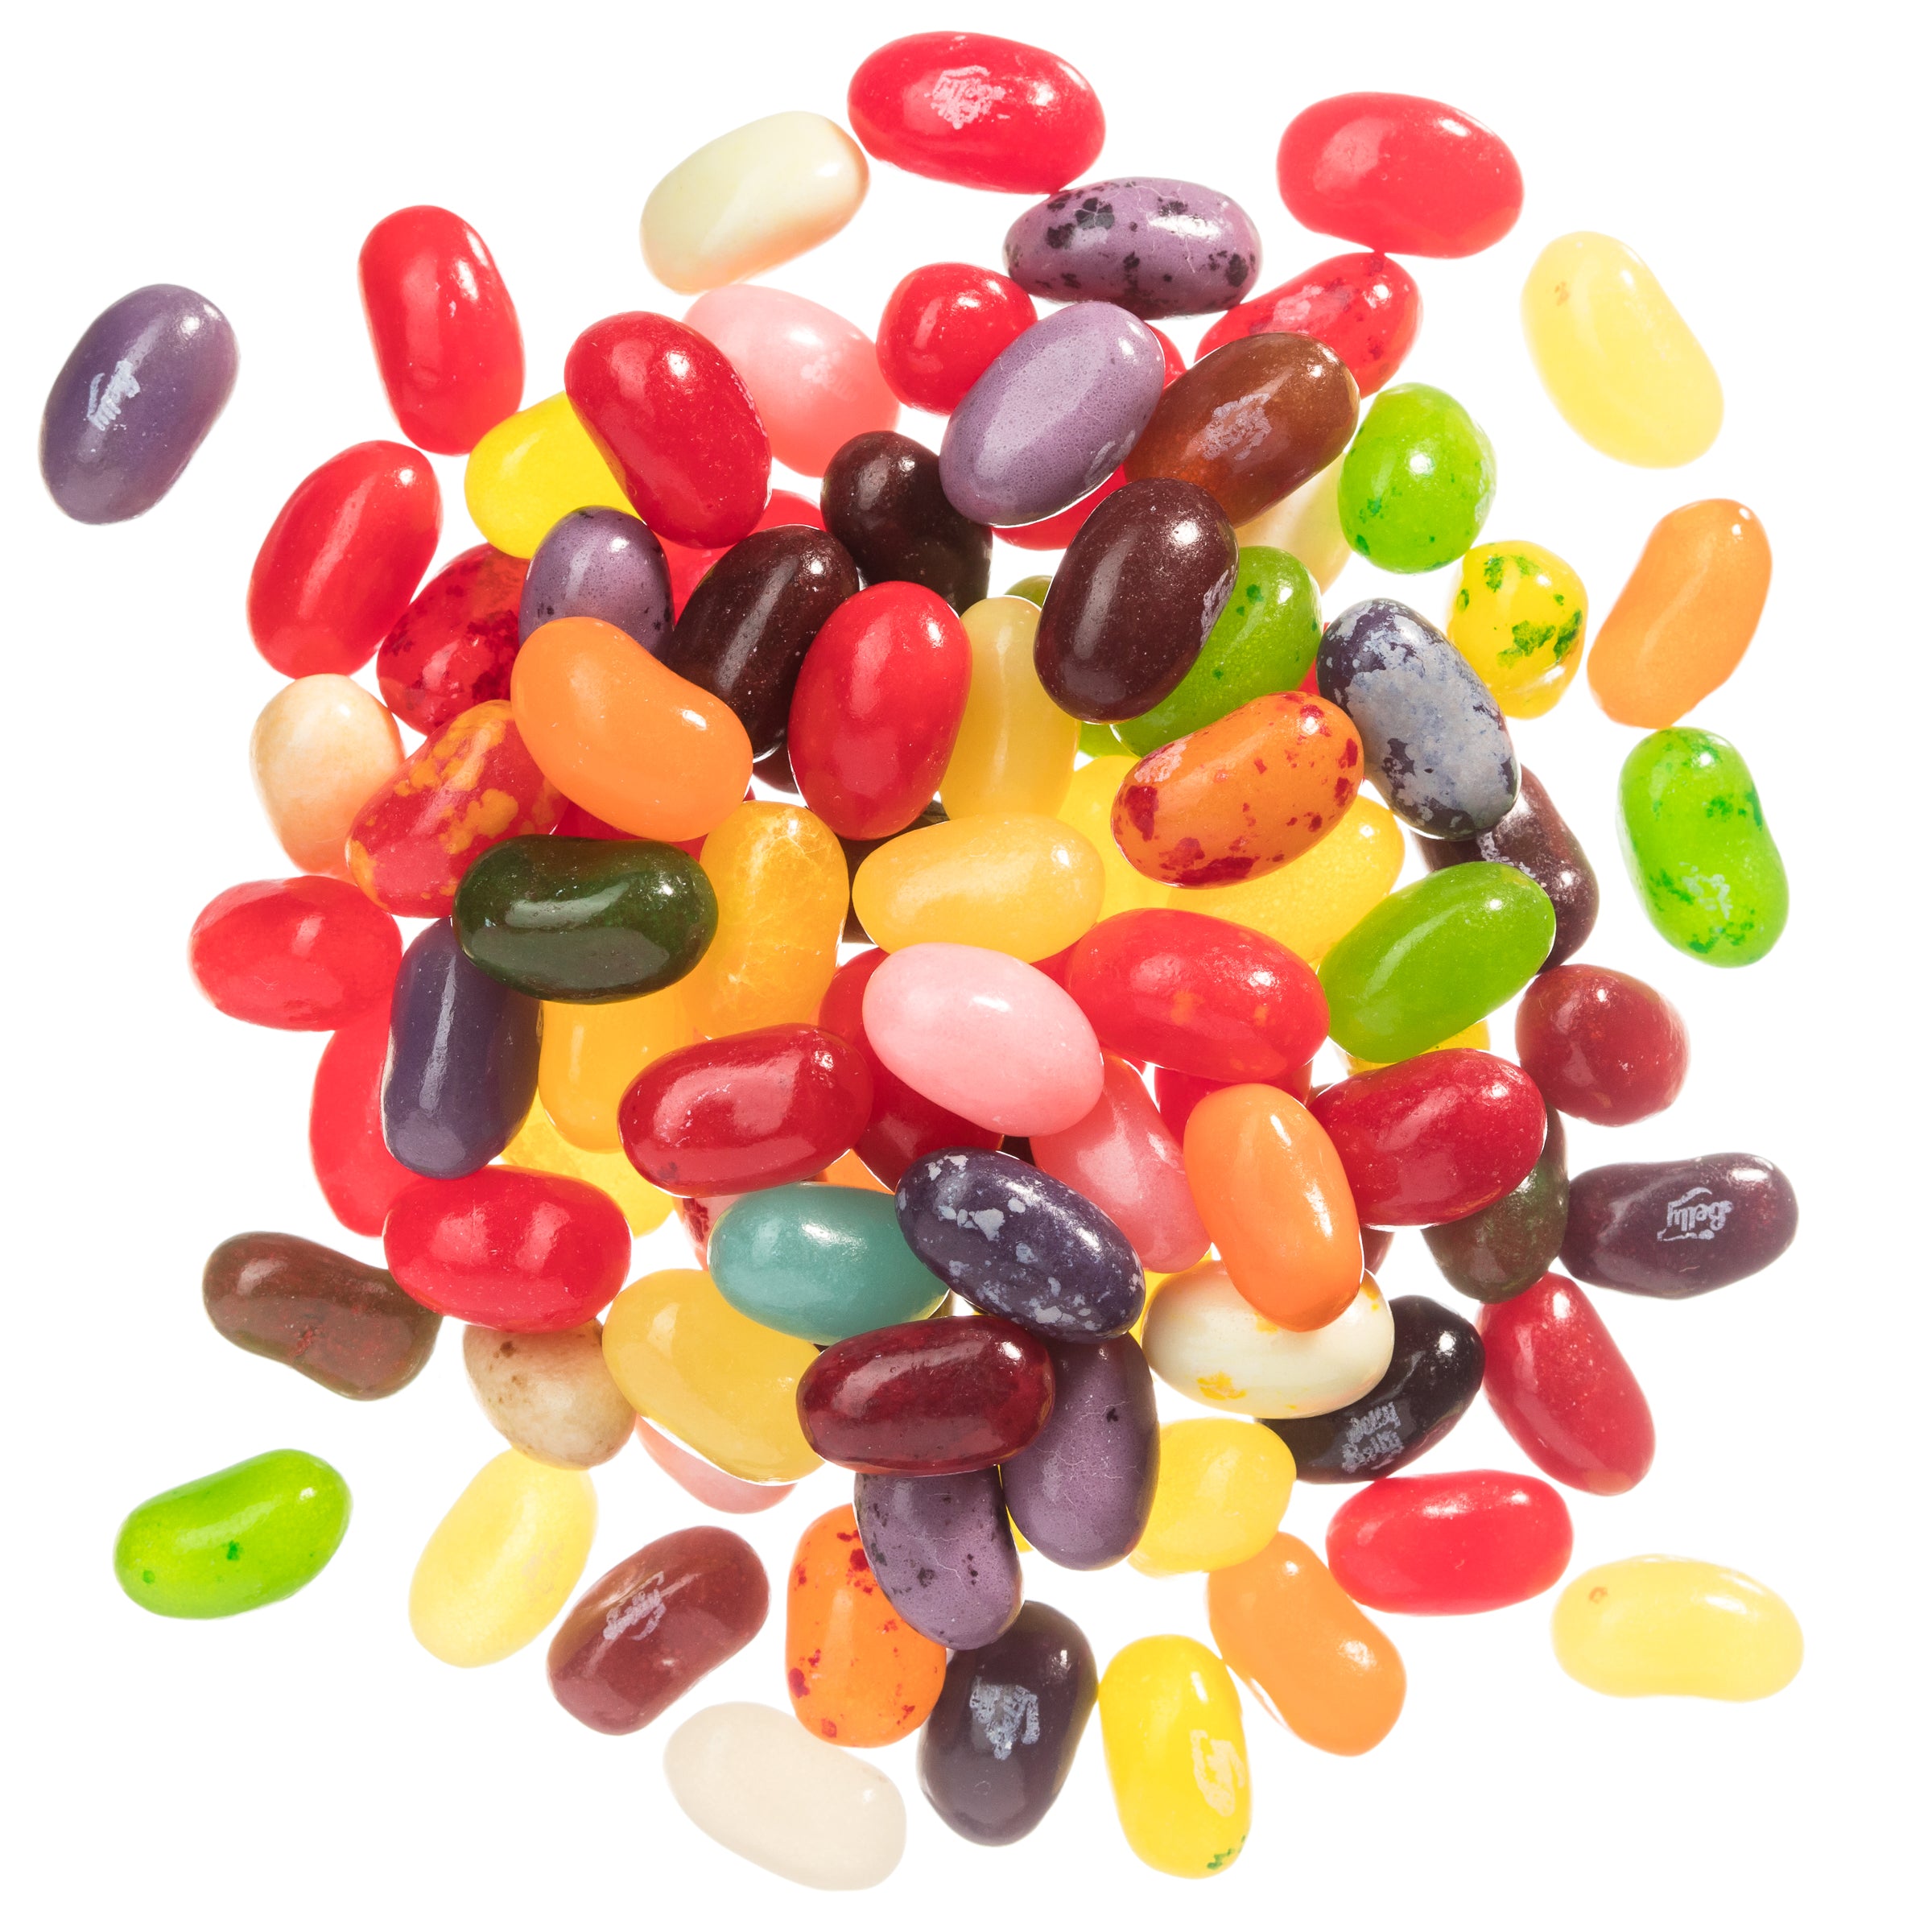 Jelly Beans - Jelly Belly 49 Flavor – Cape Cod Chocolatier